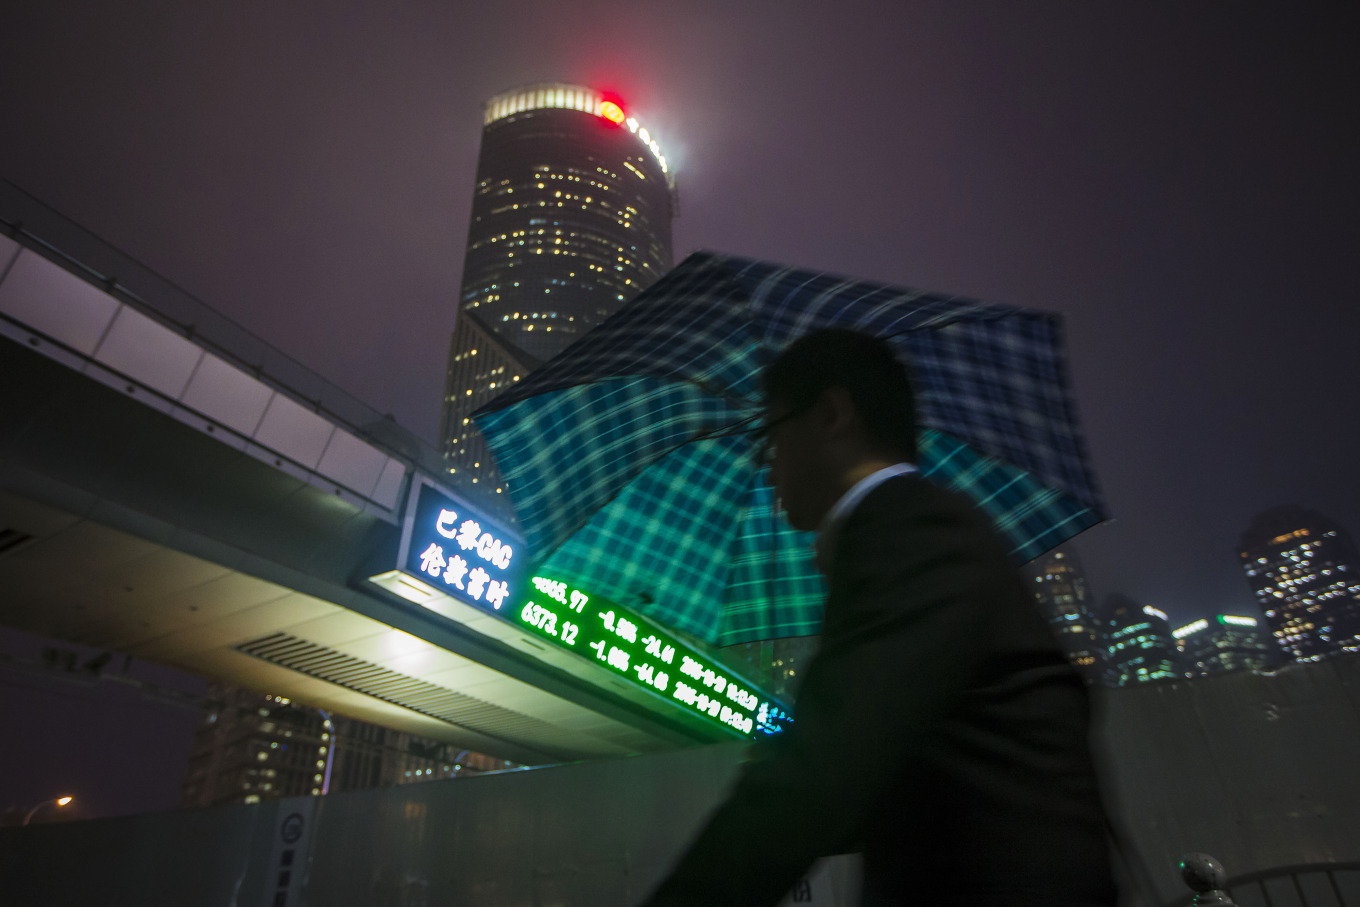 A pedestrian holding an umbrella walks past a pedestrian footbridge featuring an electronic stock ticker at night in the Lujiazui district of Shanghai, China.